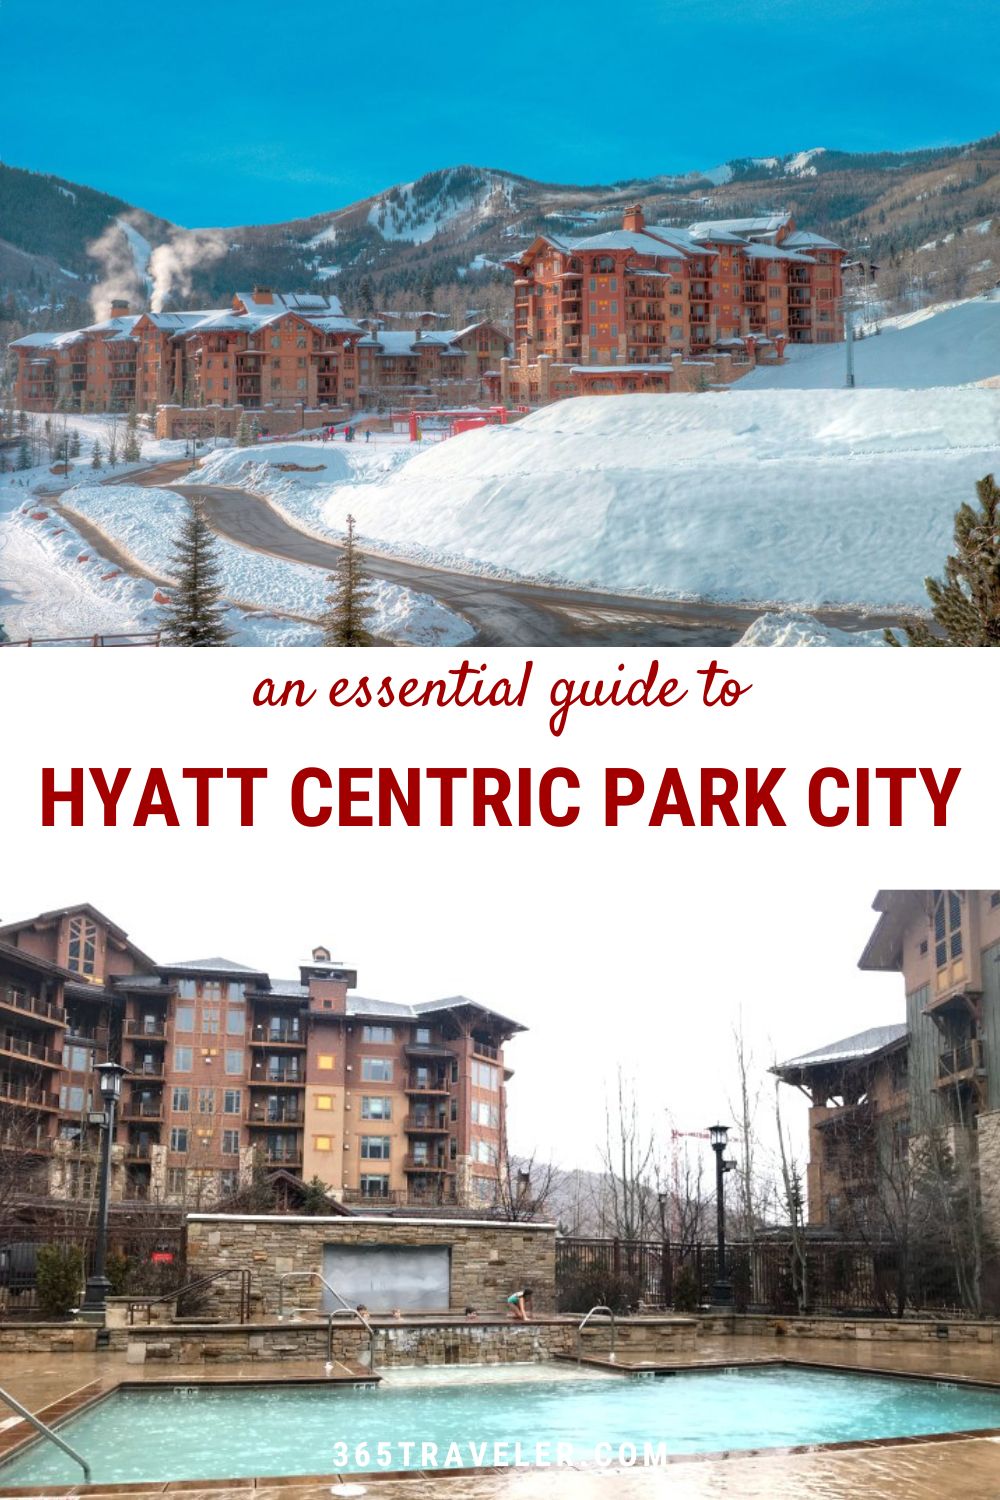 Hyatt Centric Park City: Your Logistical Treasure for Skiing With Kids